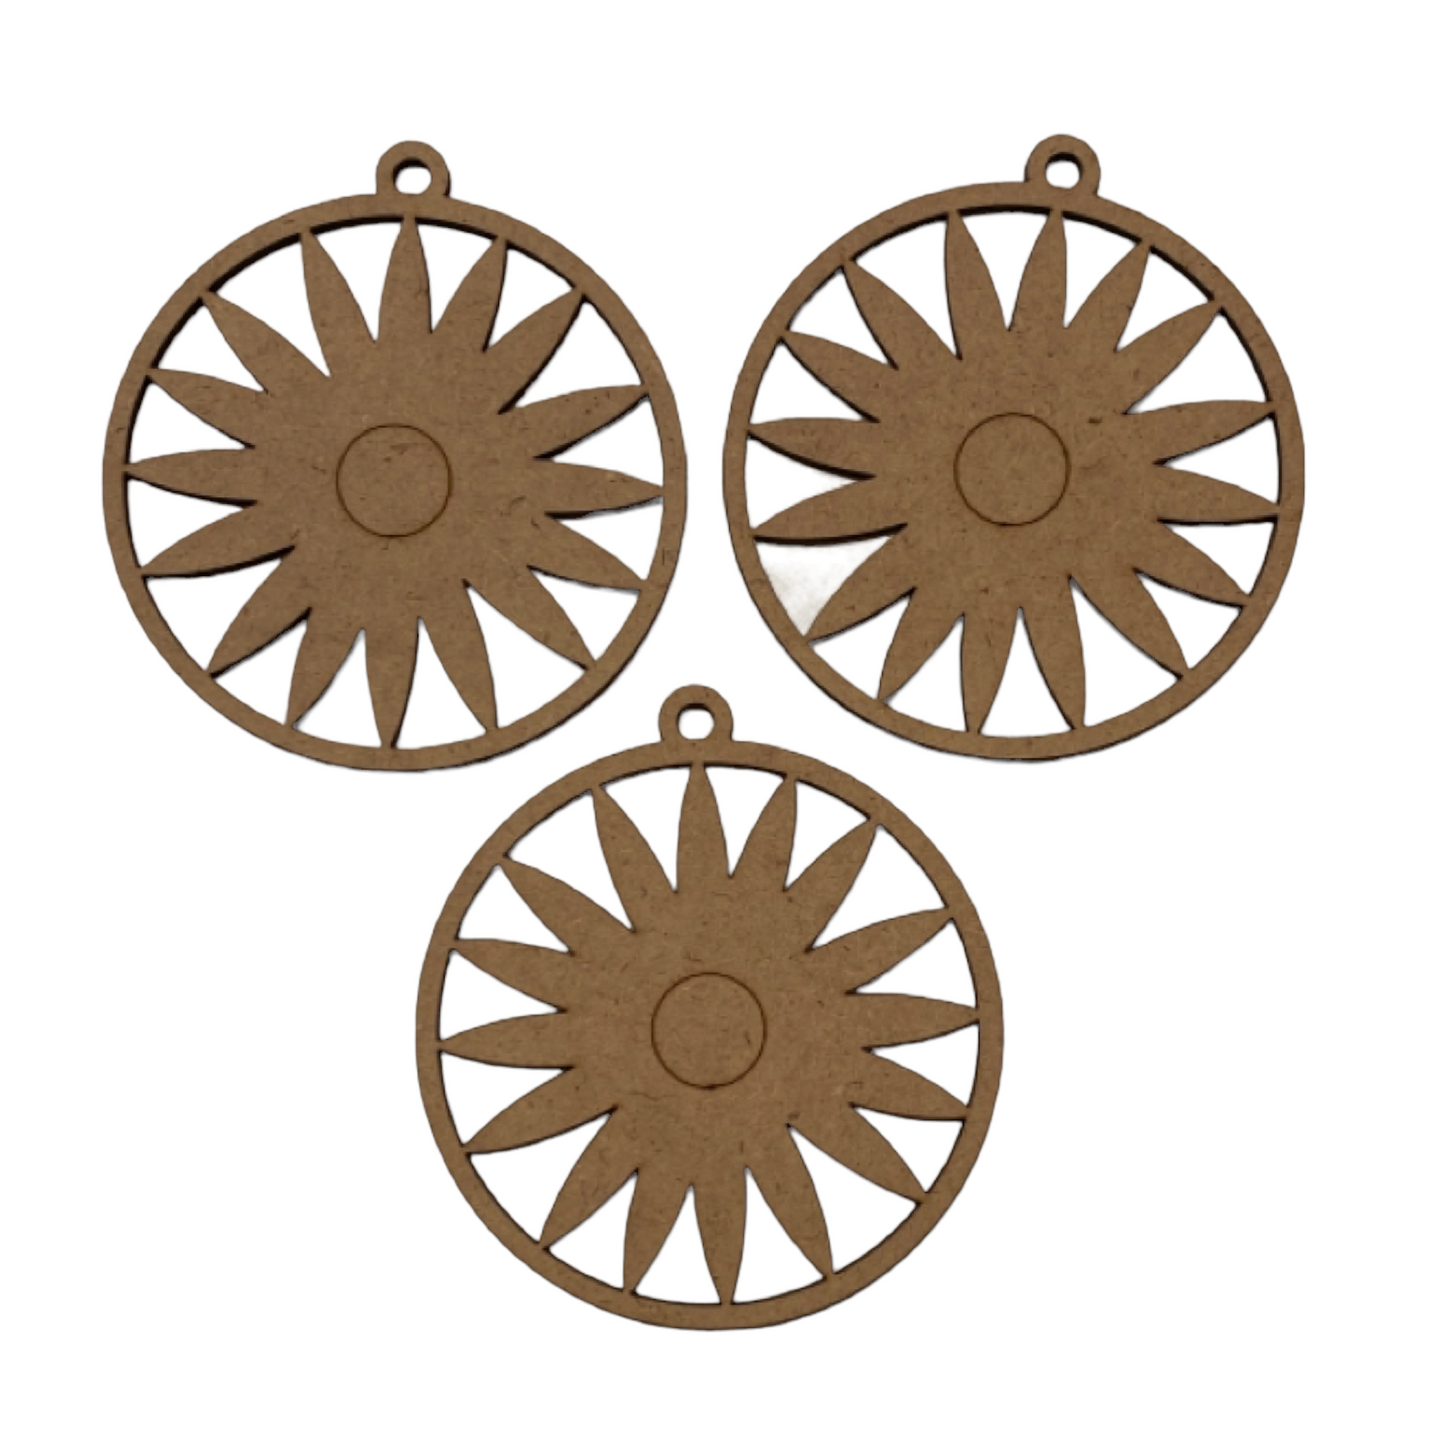 Daisy Flower Hanging Decoration x 3 DIY MDF Timber Art - The Renmy Store Homewares & Gifts 